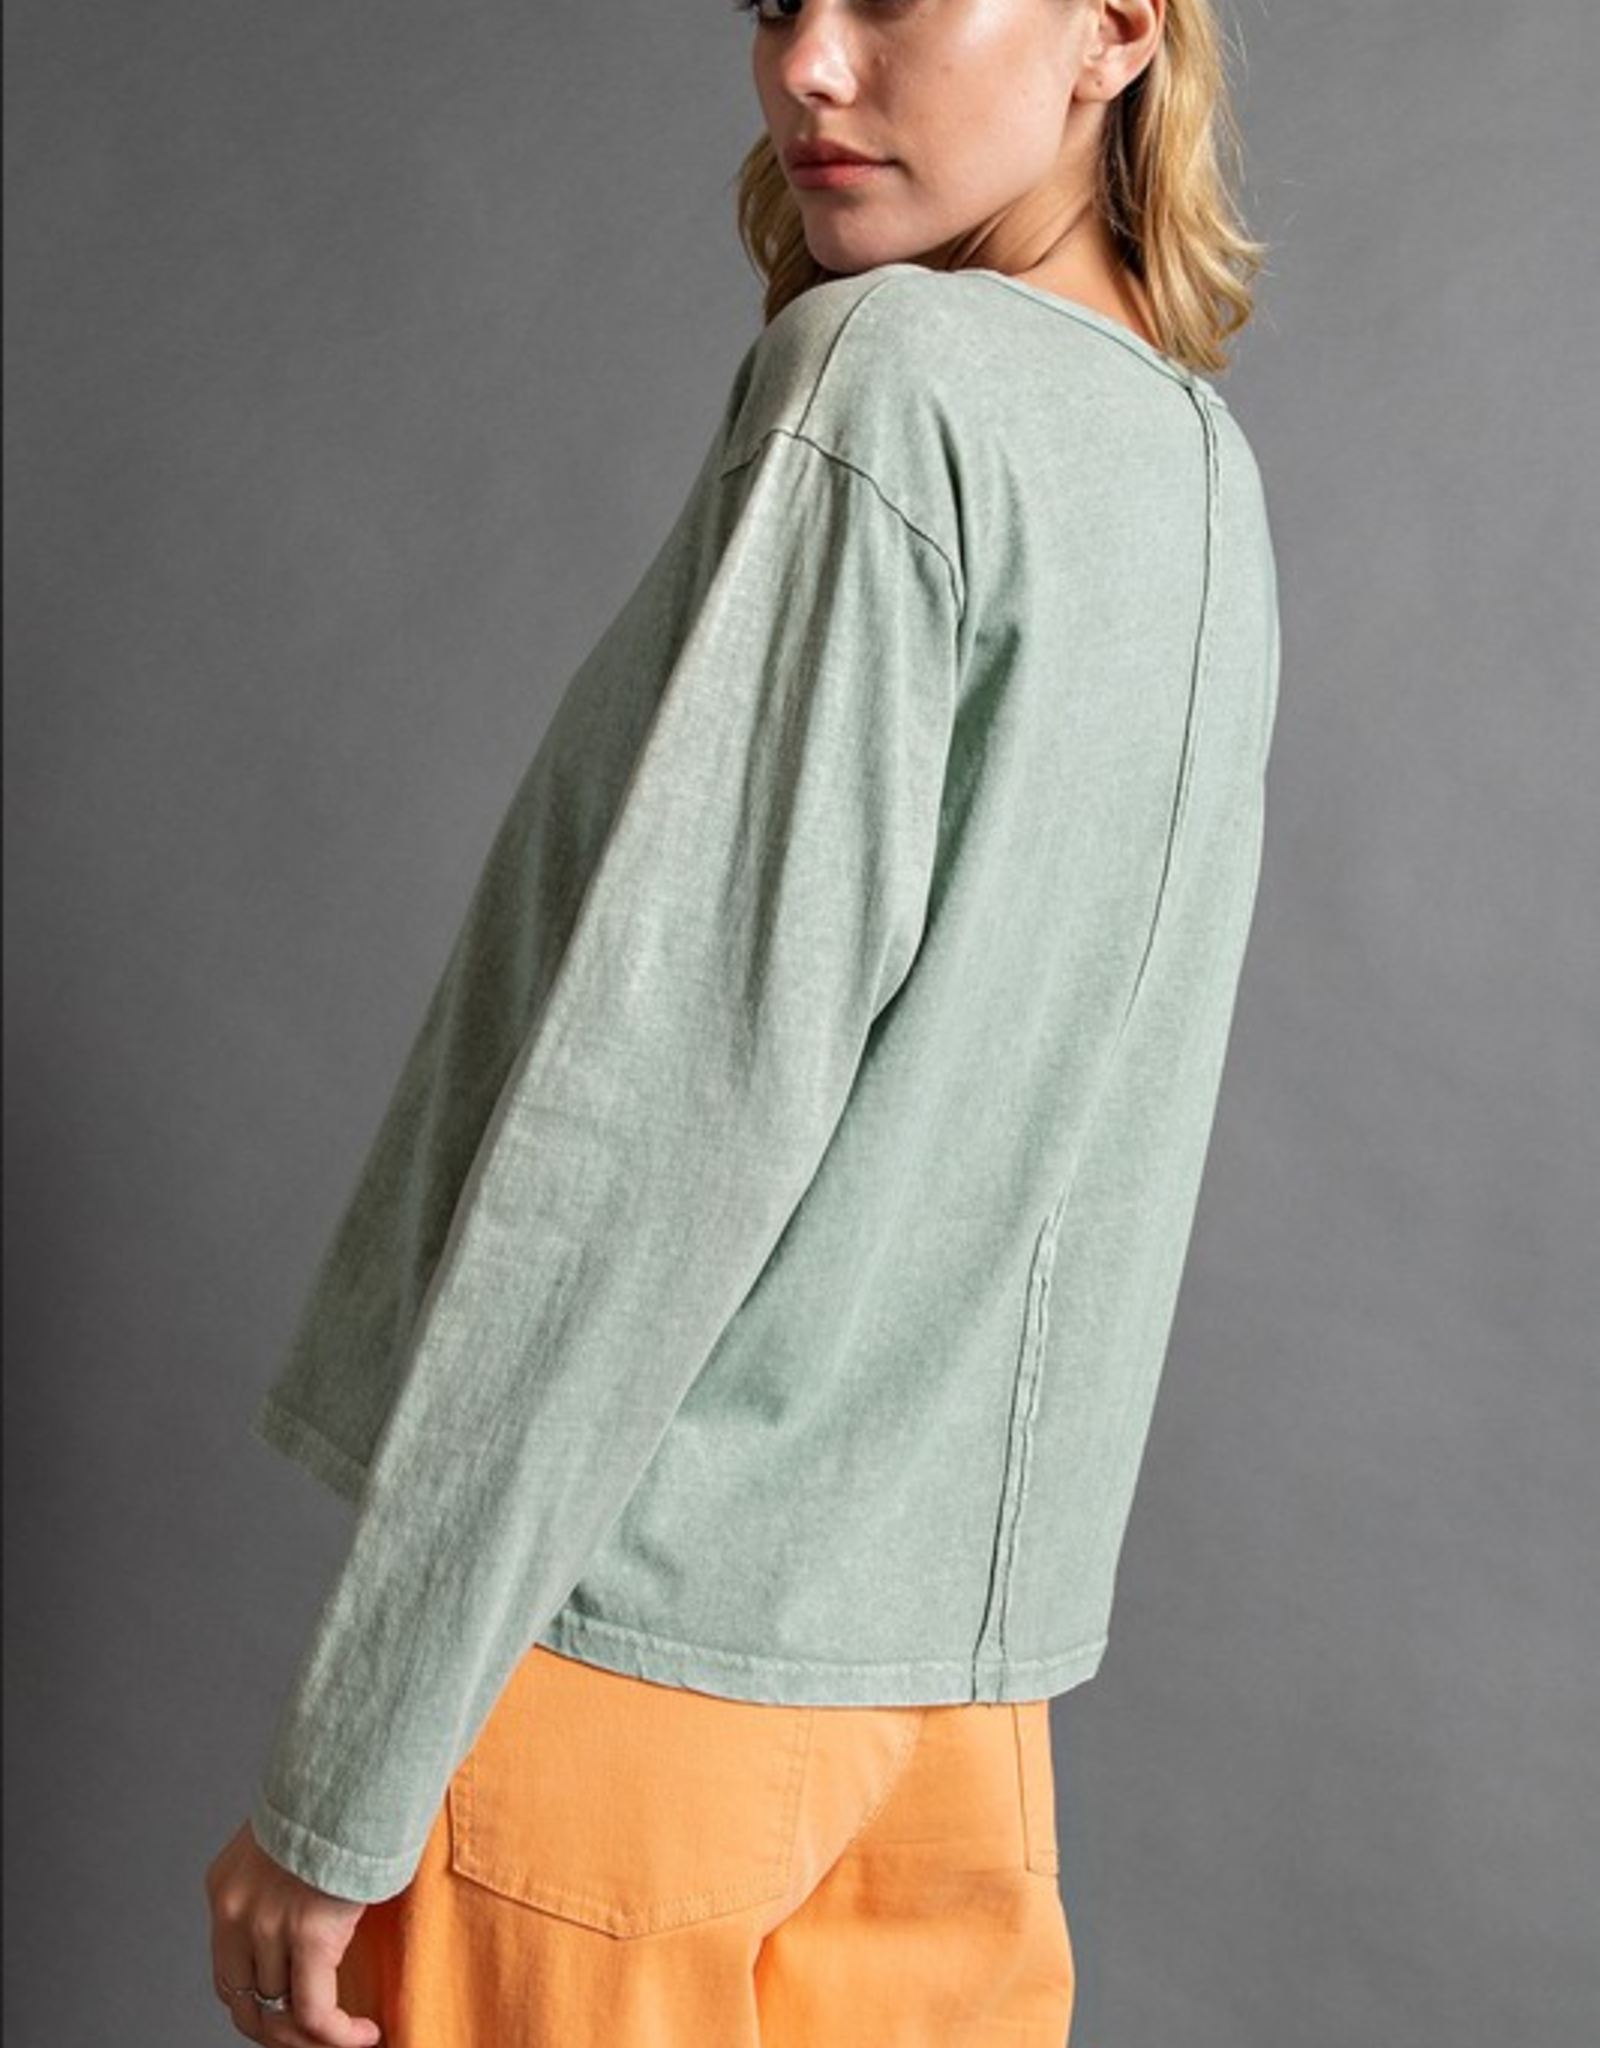 Easel Cotton Jersey Mineral Wash Top in Sage